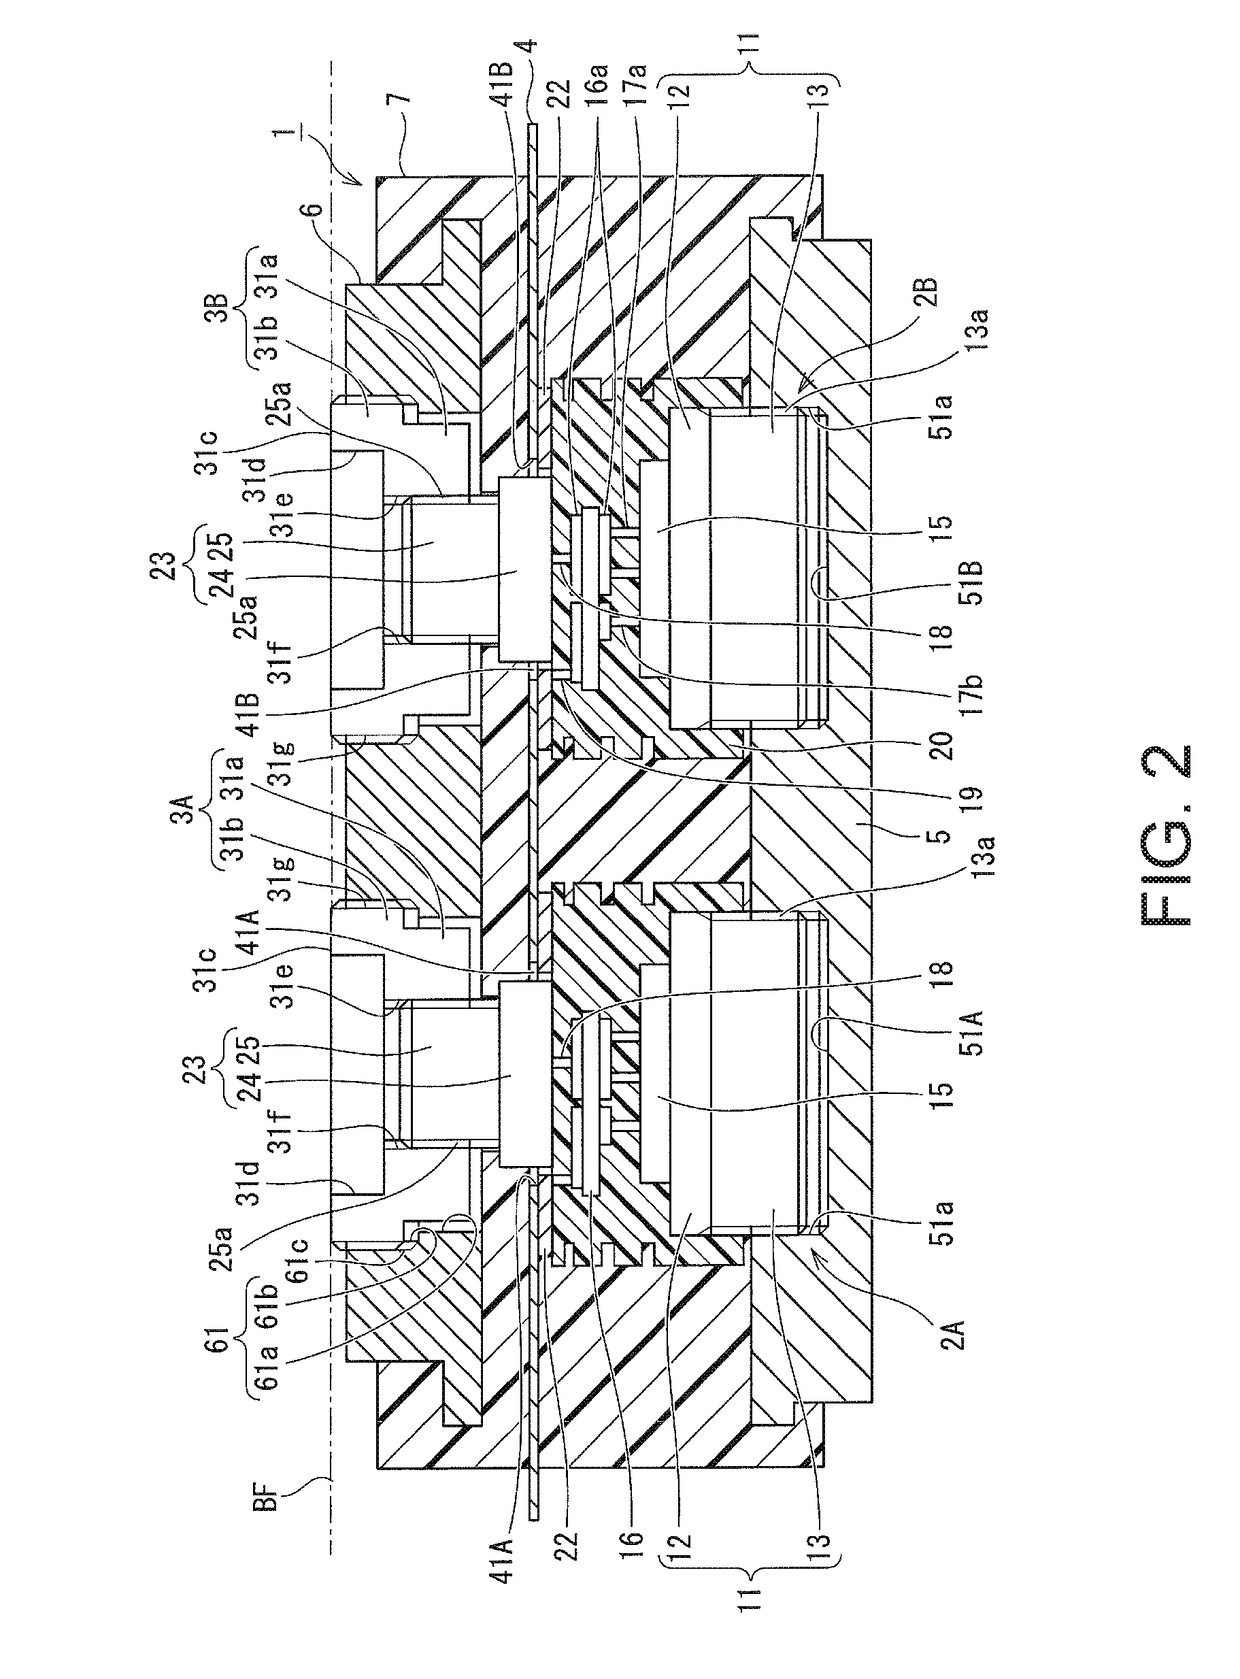 Pressure contact-type semiconductor module